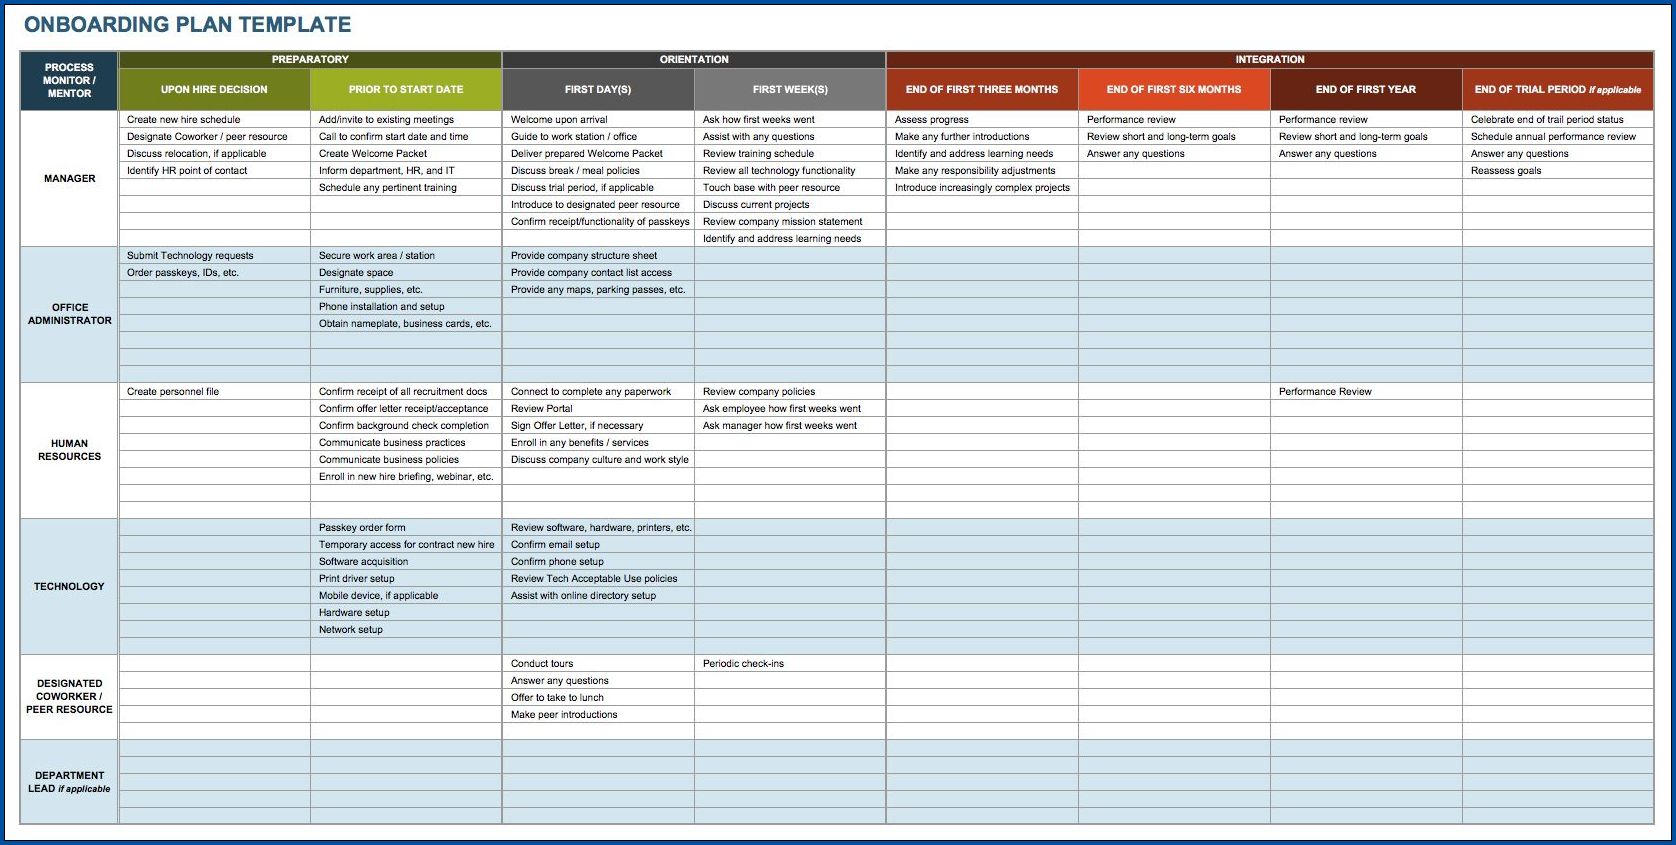 Example of Onboarding Process Checklist Template